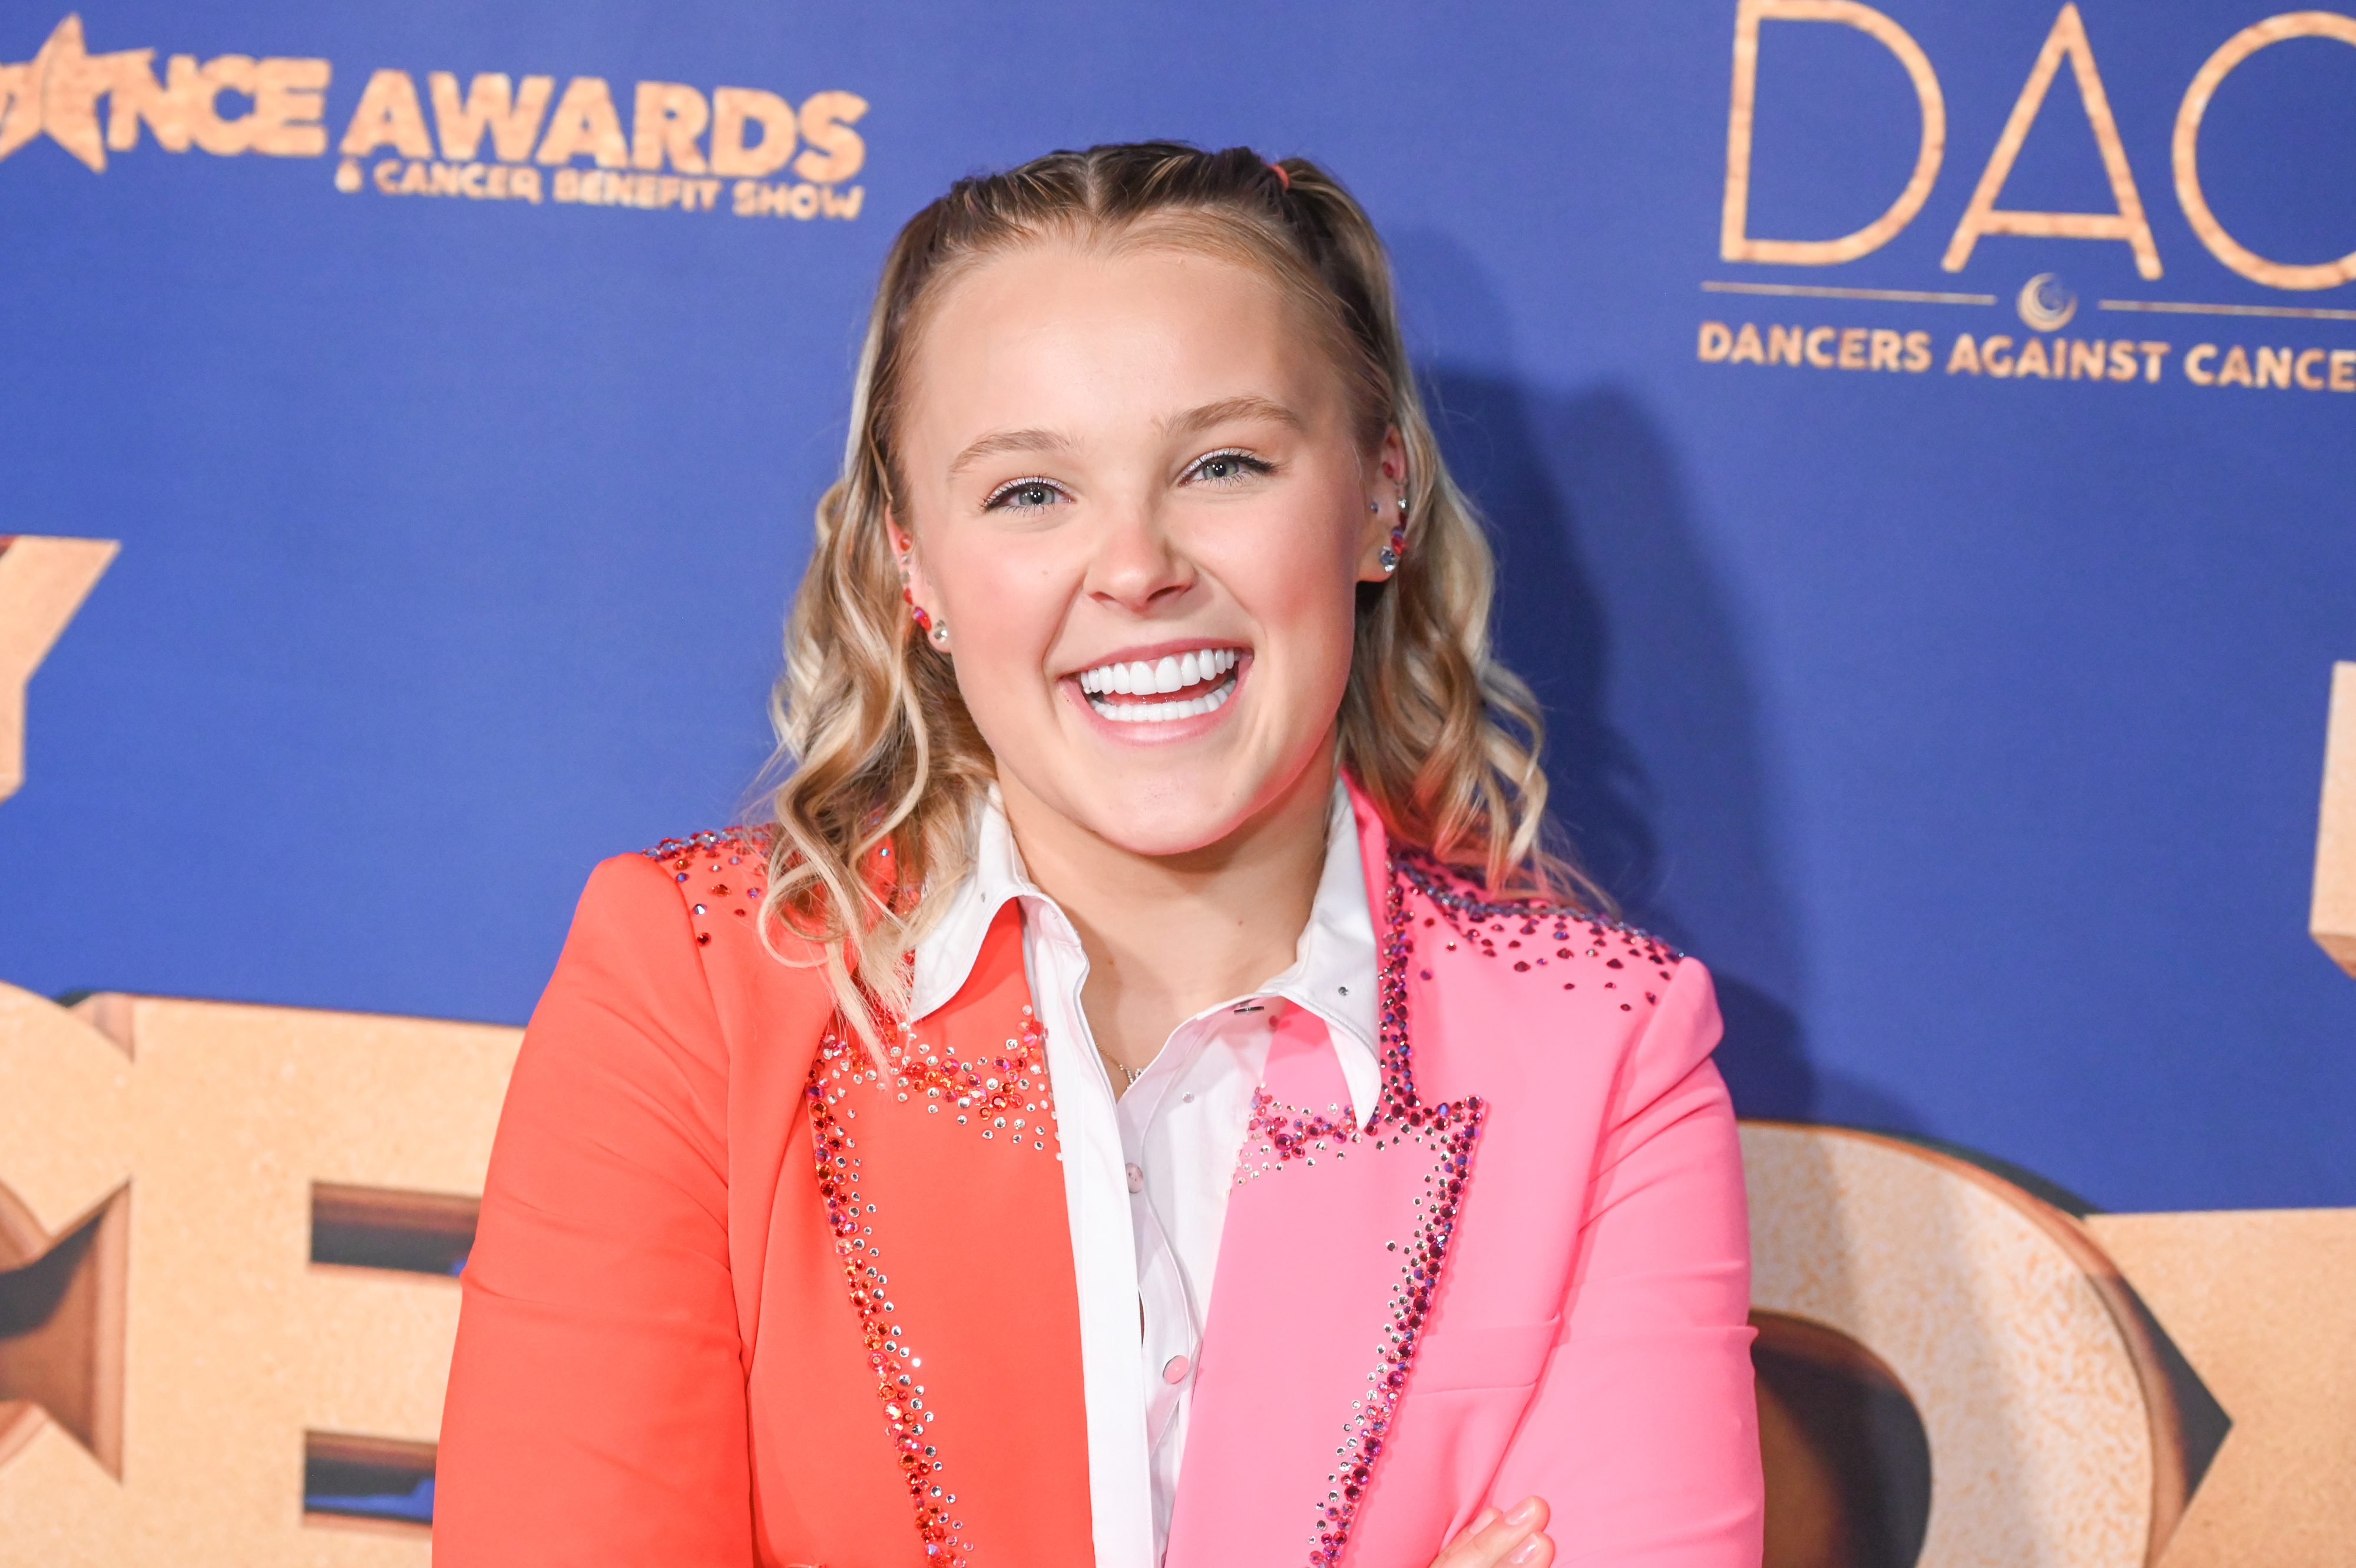 JoJo Siwa smiling, wearing a pink shirt and orange jacket with details at a dance awards event